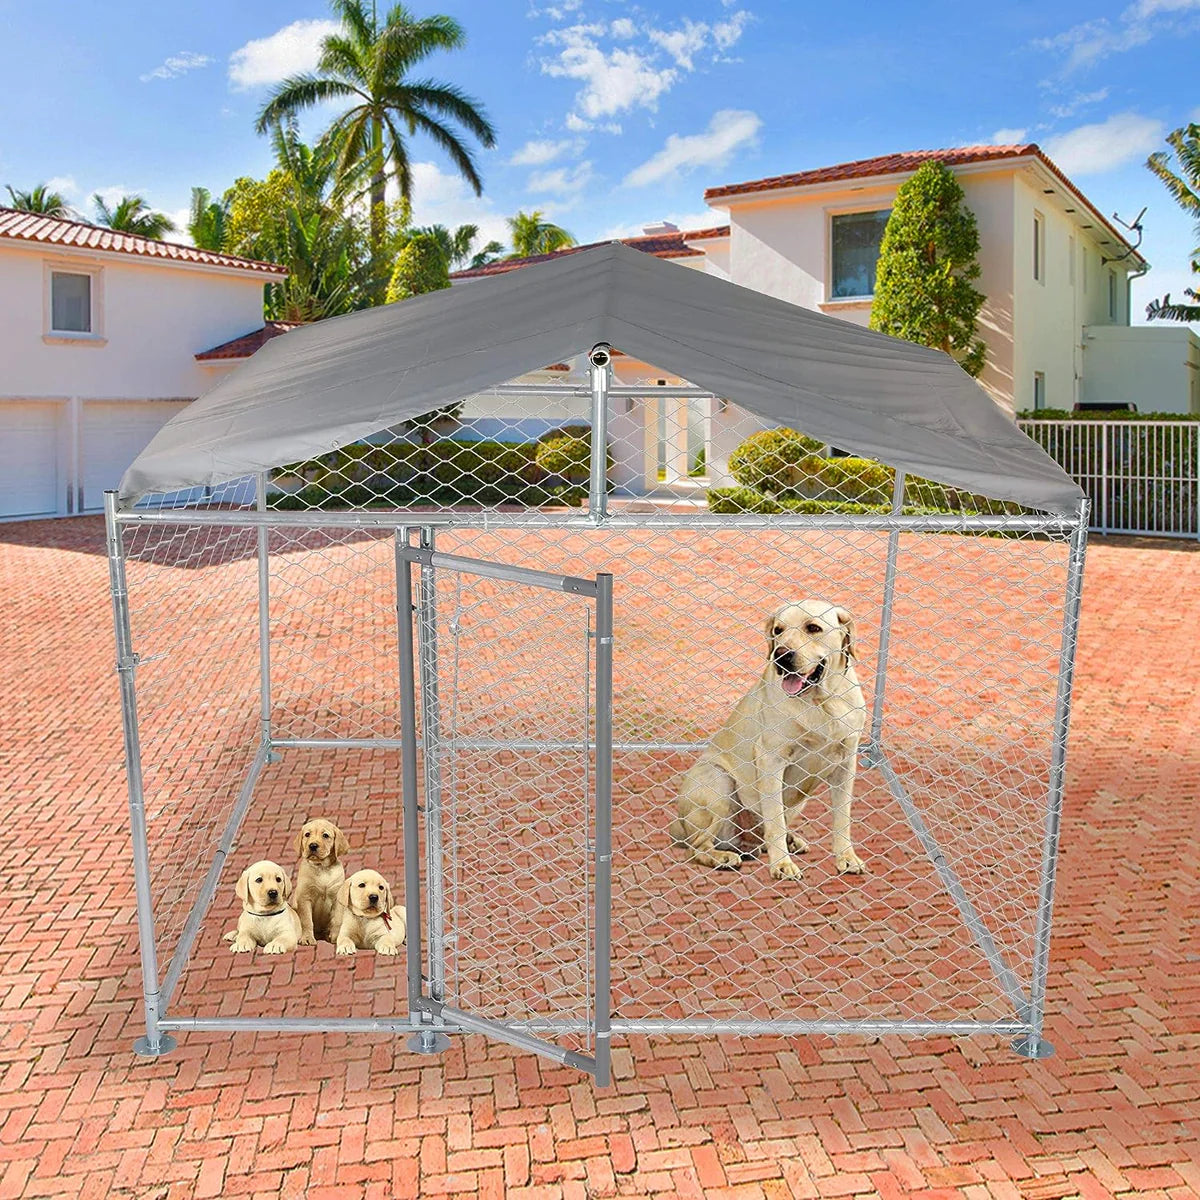 Outdoor Dog Kennel Galvanized Steel Pet Playpen with Waterproof Cover Secure Lock for Large Dog